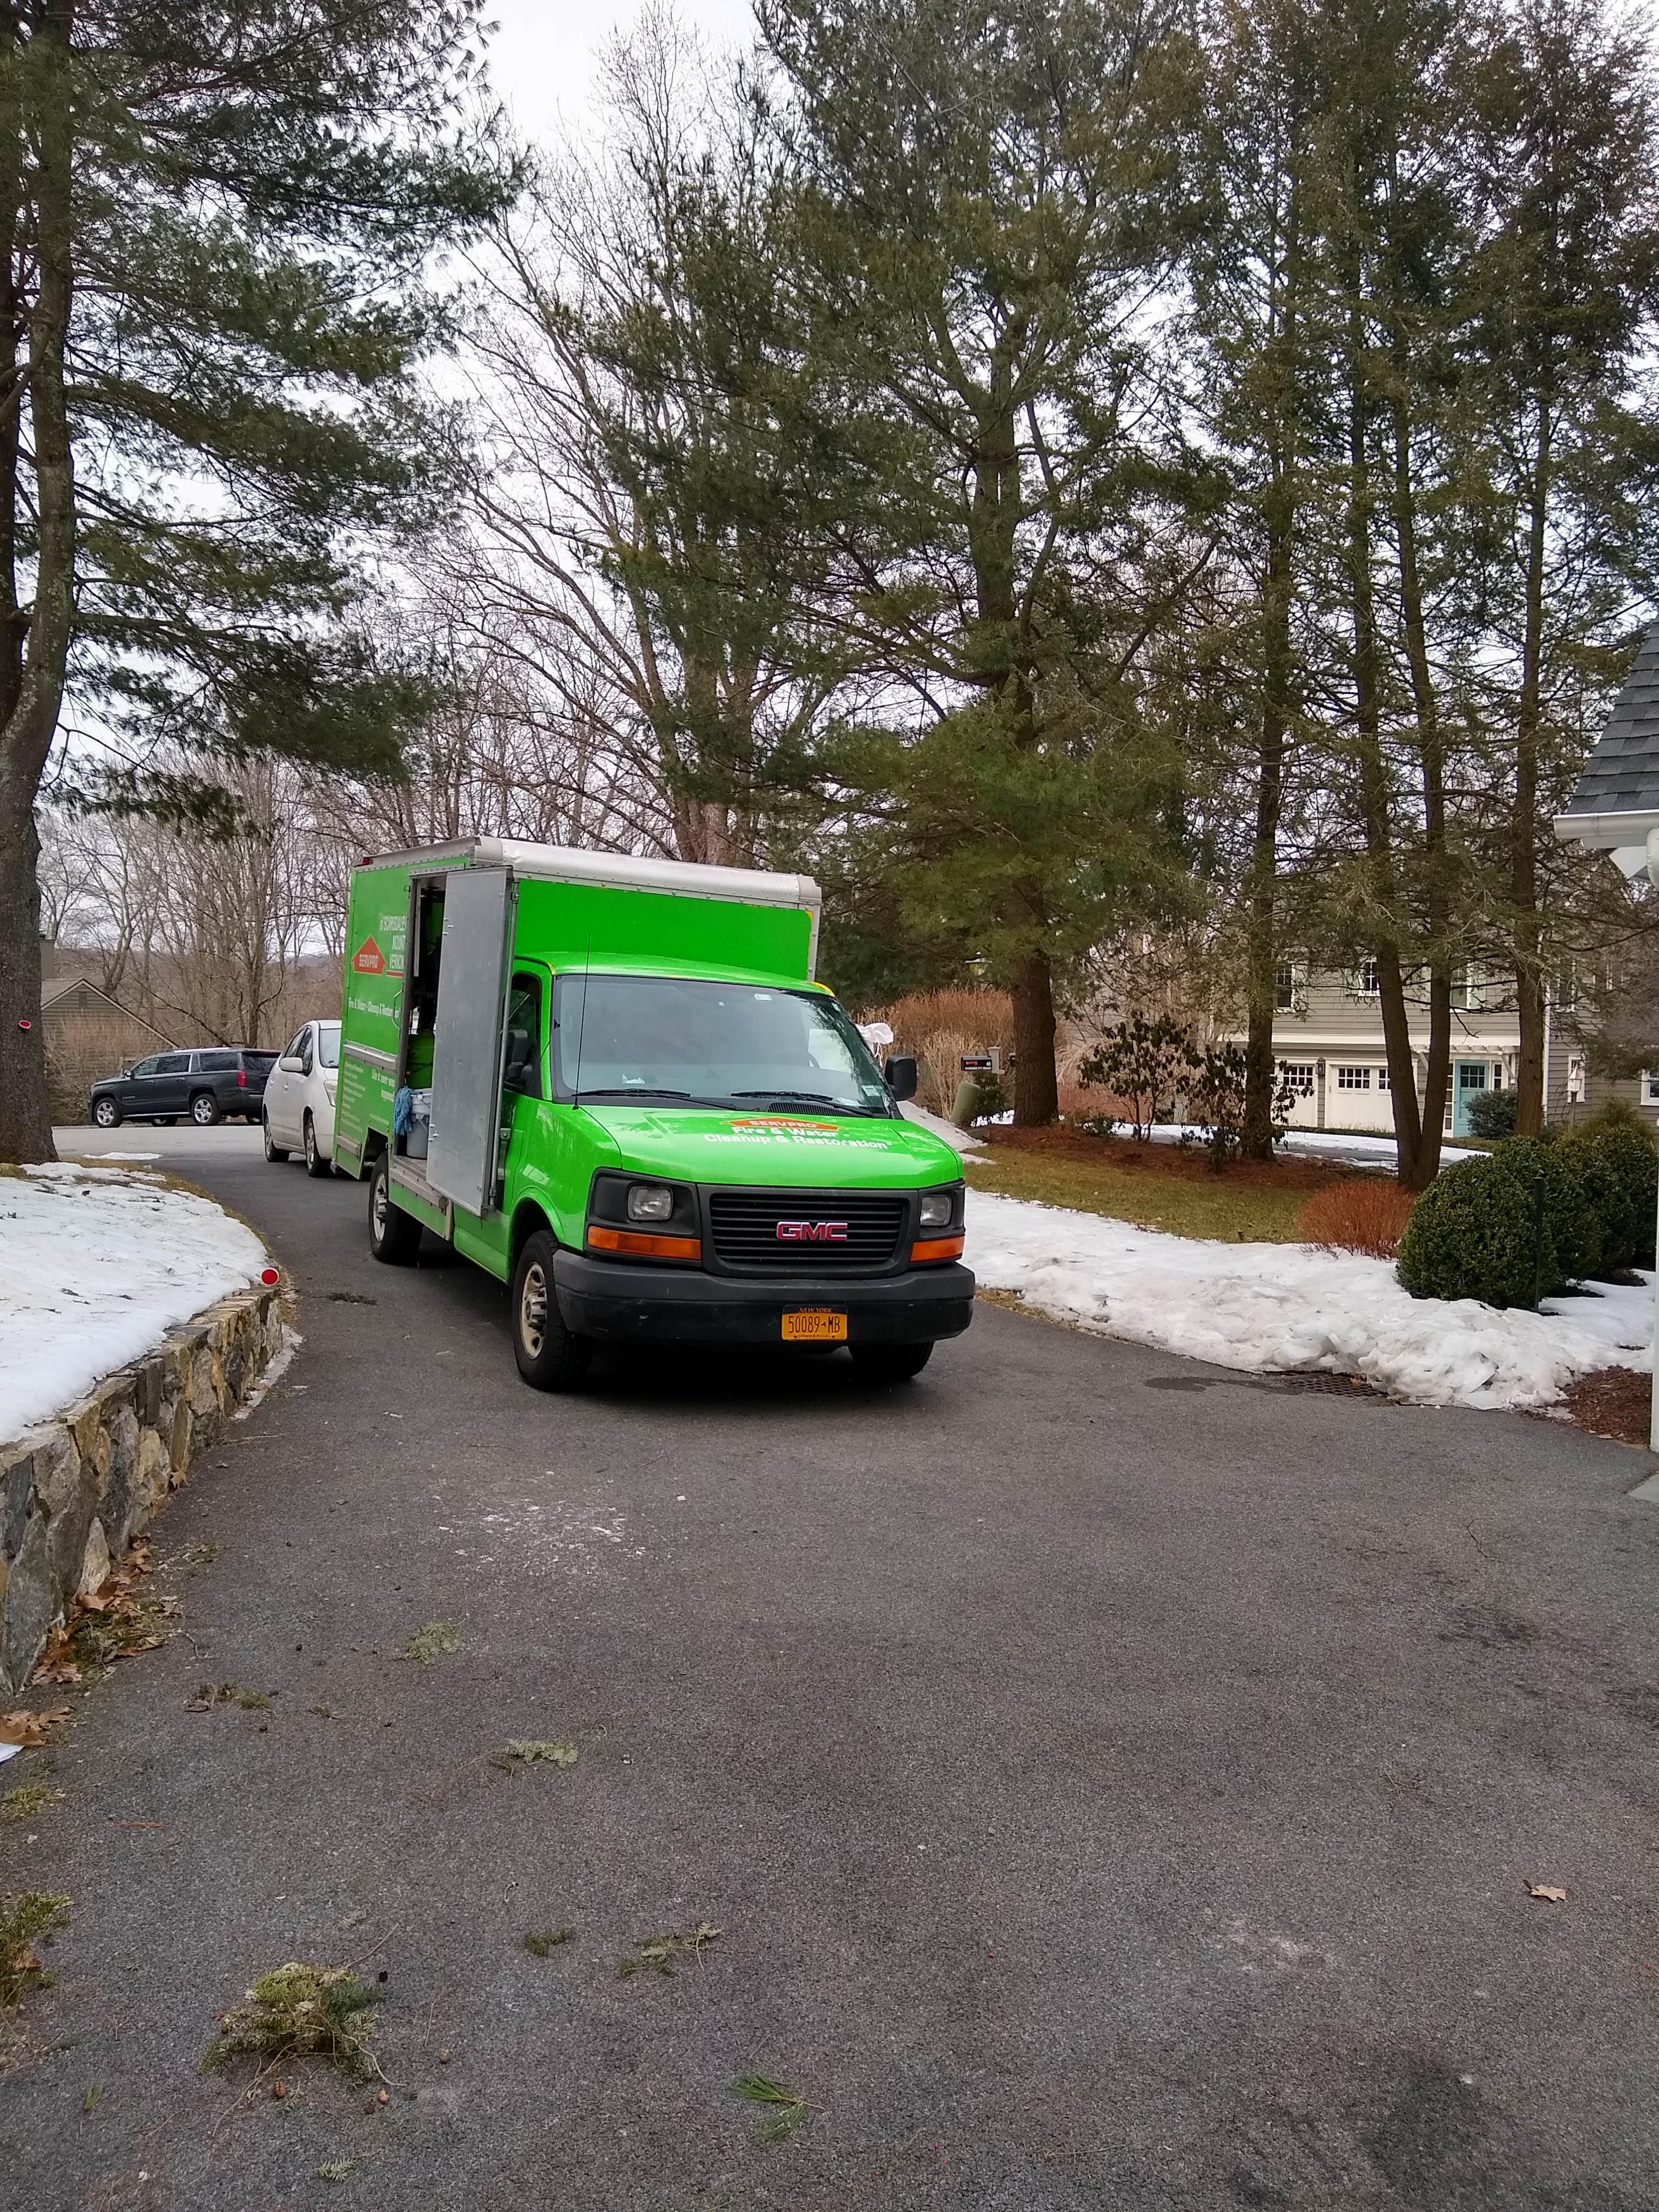 SERVPRO of Scarsdale/Mount Vernon is prepared for this winter season! When winter storms hit, we have you and your family covered - 24/7.